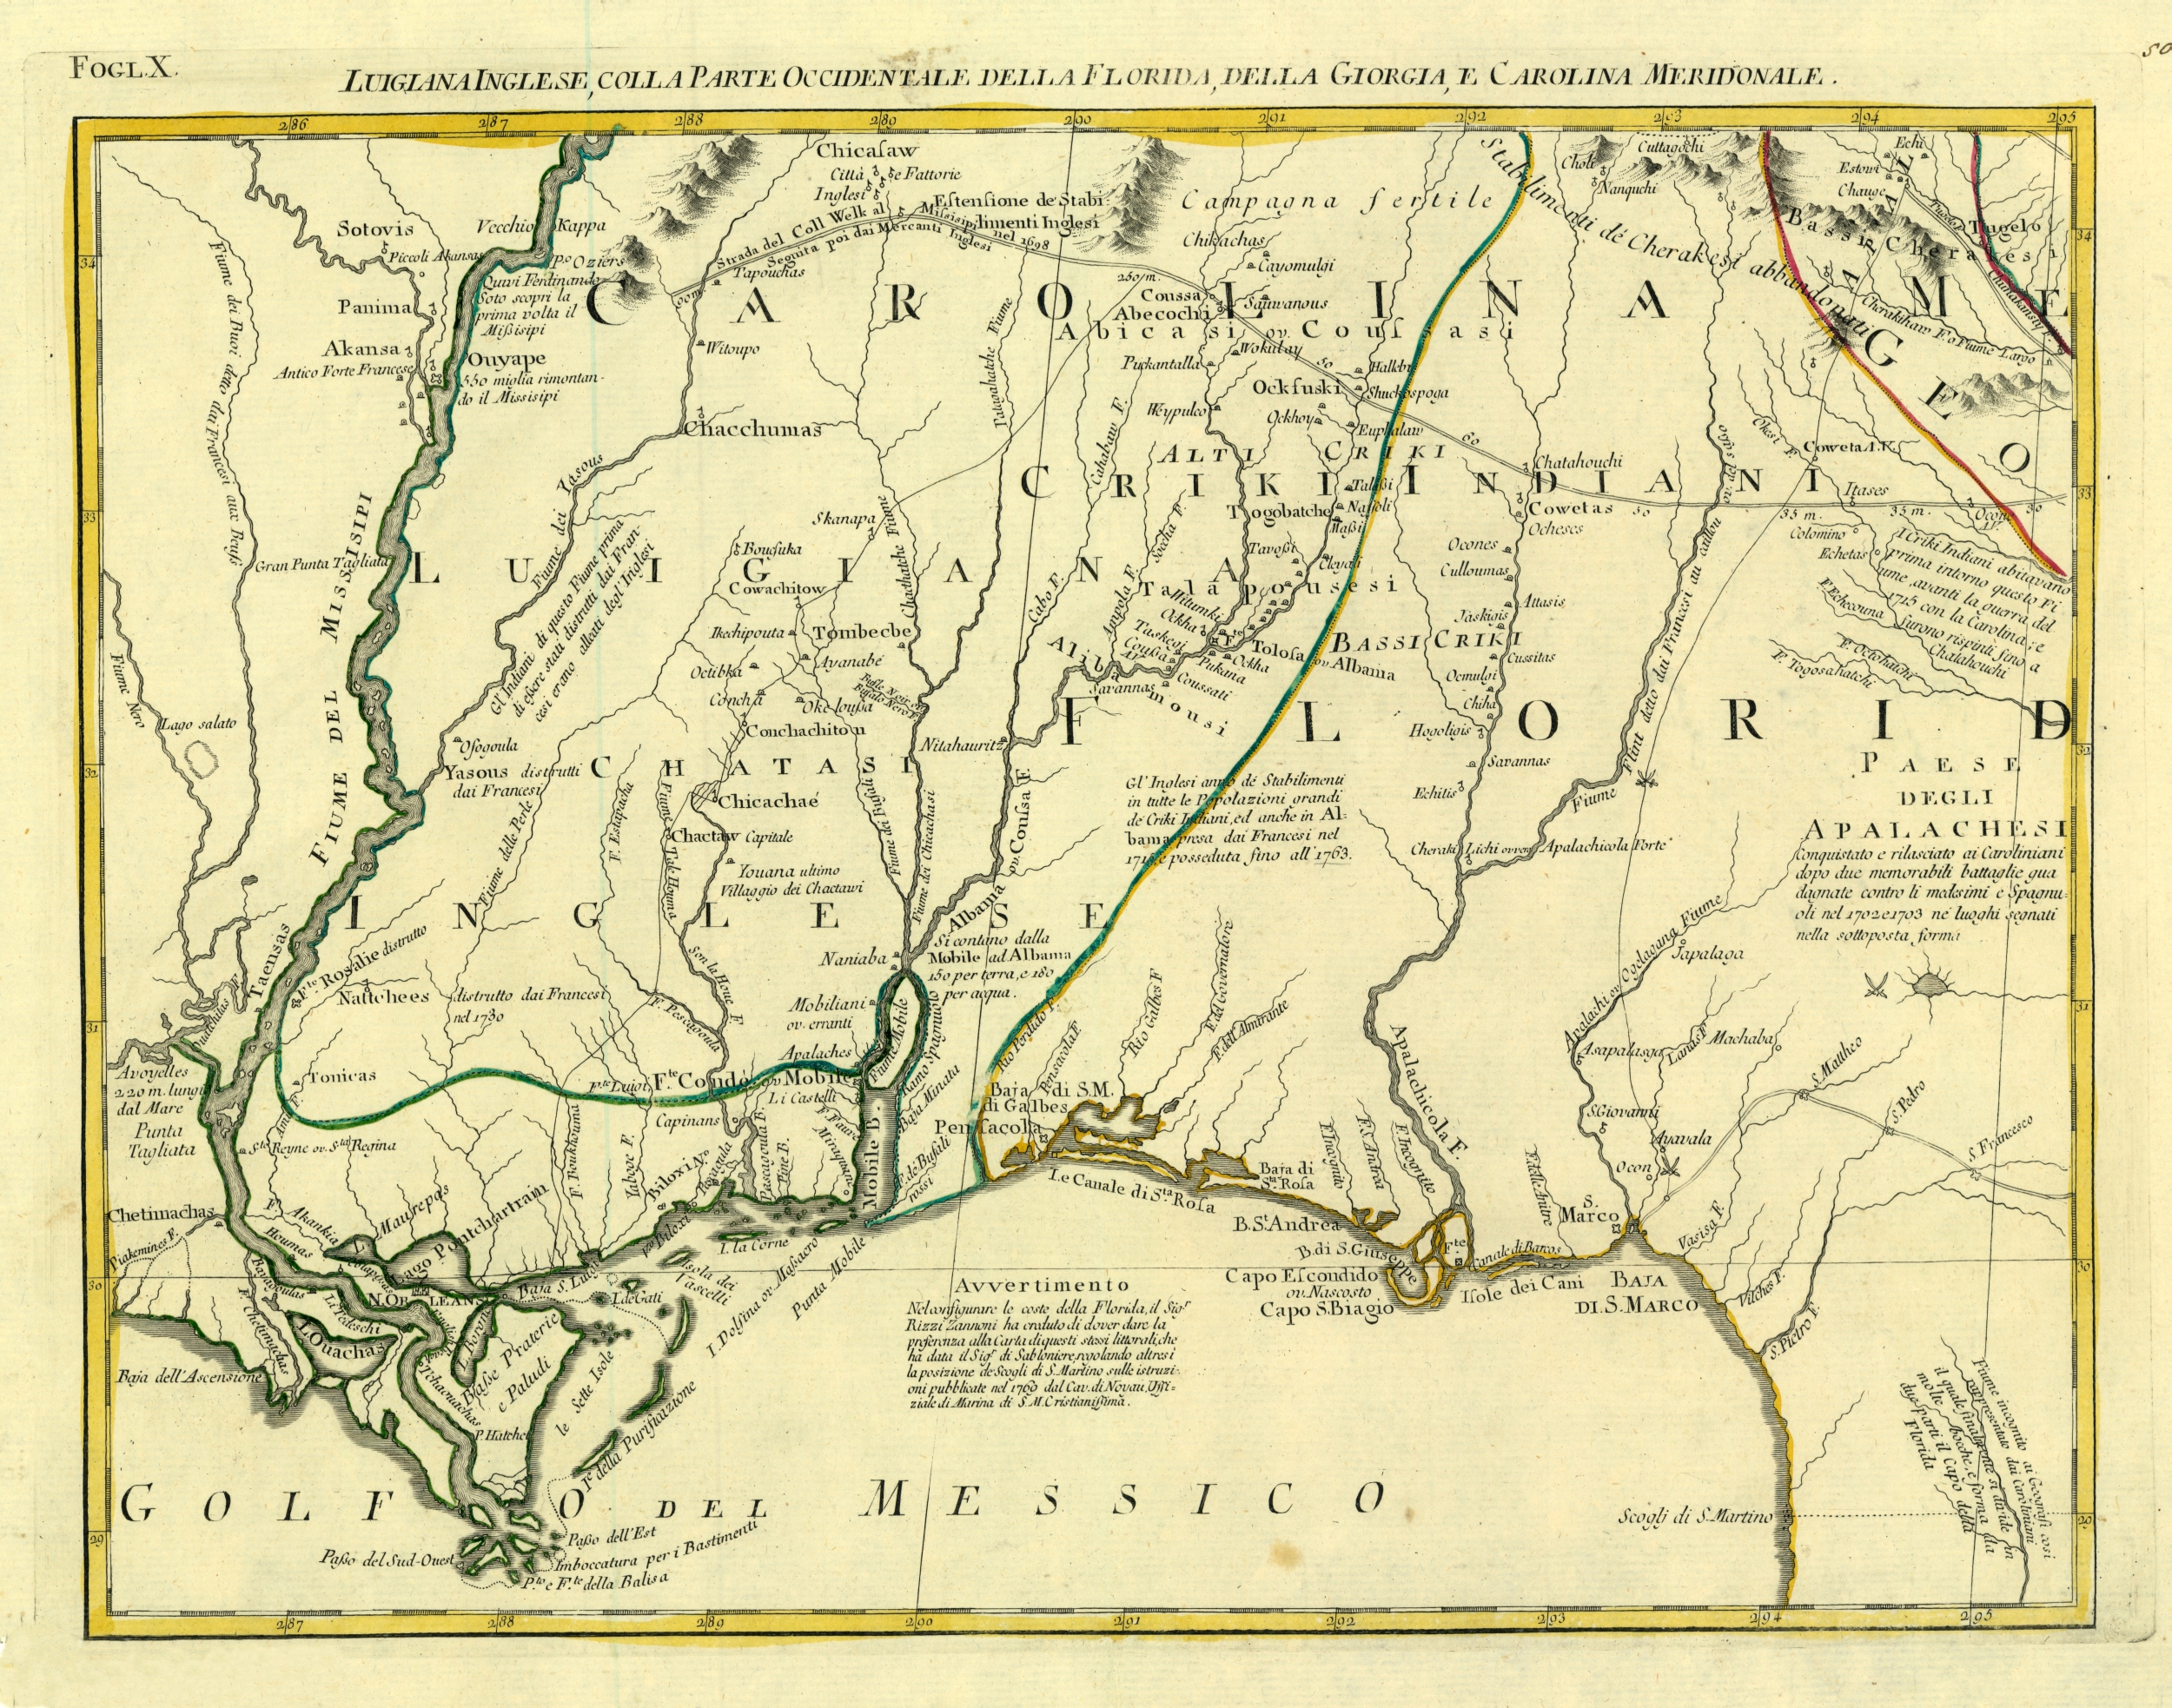 Map of West Florida, 1778